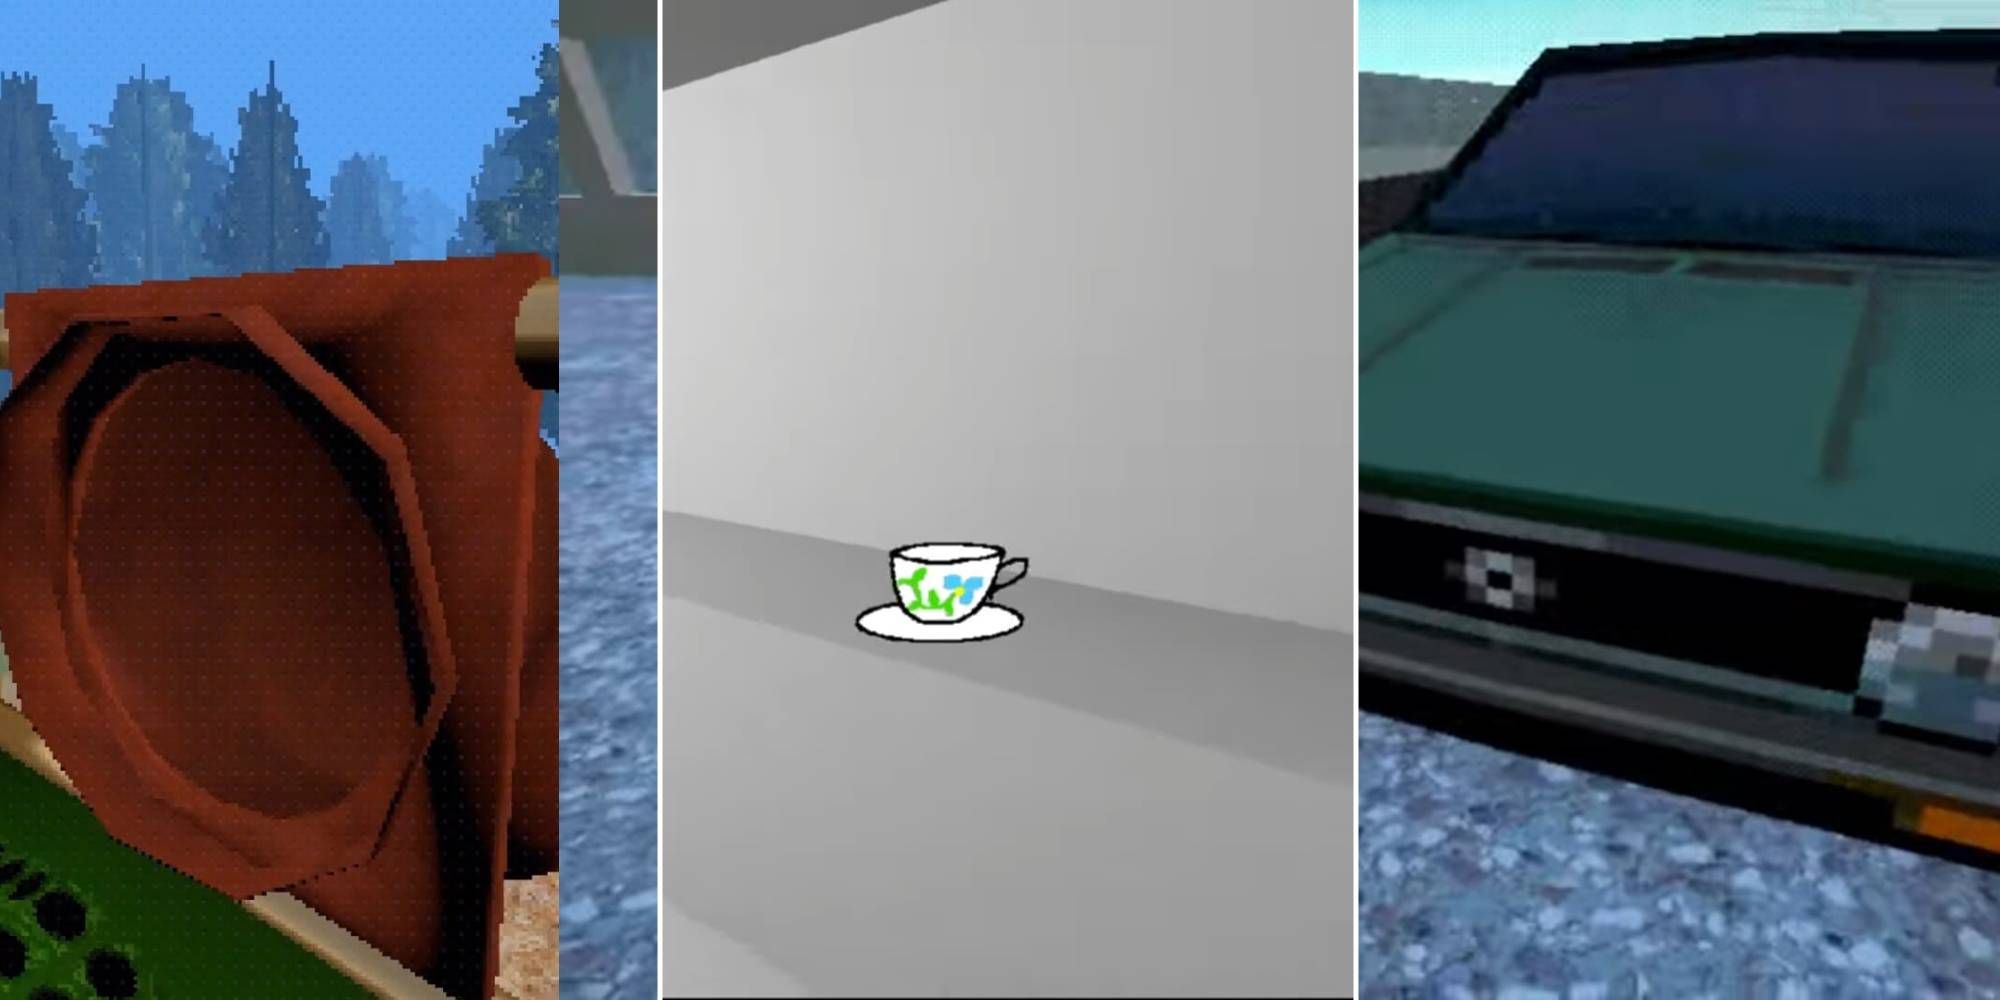 The player approaches the slide in A Slide in the Woods, a teacup sits on a counter in How to Make a Cup of Tea, and the player inspects their car in Filled With Freedom.